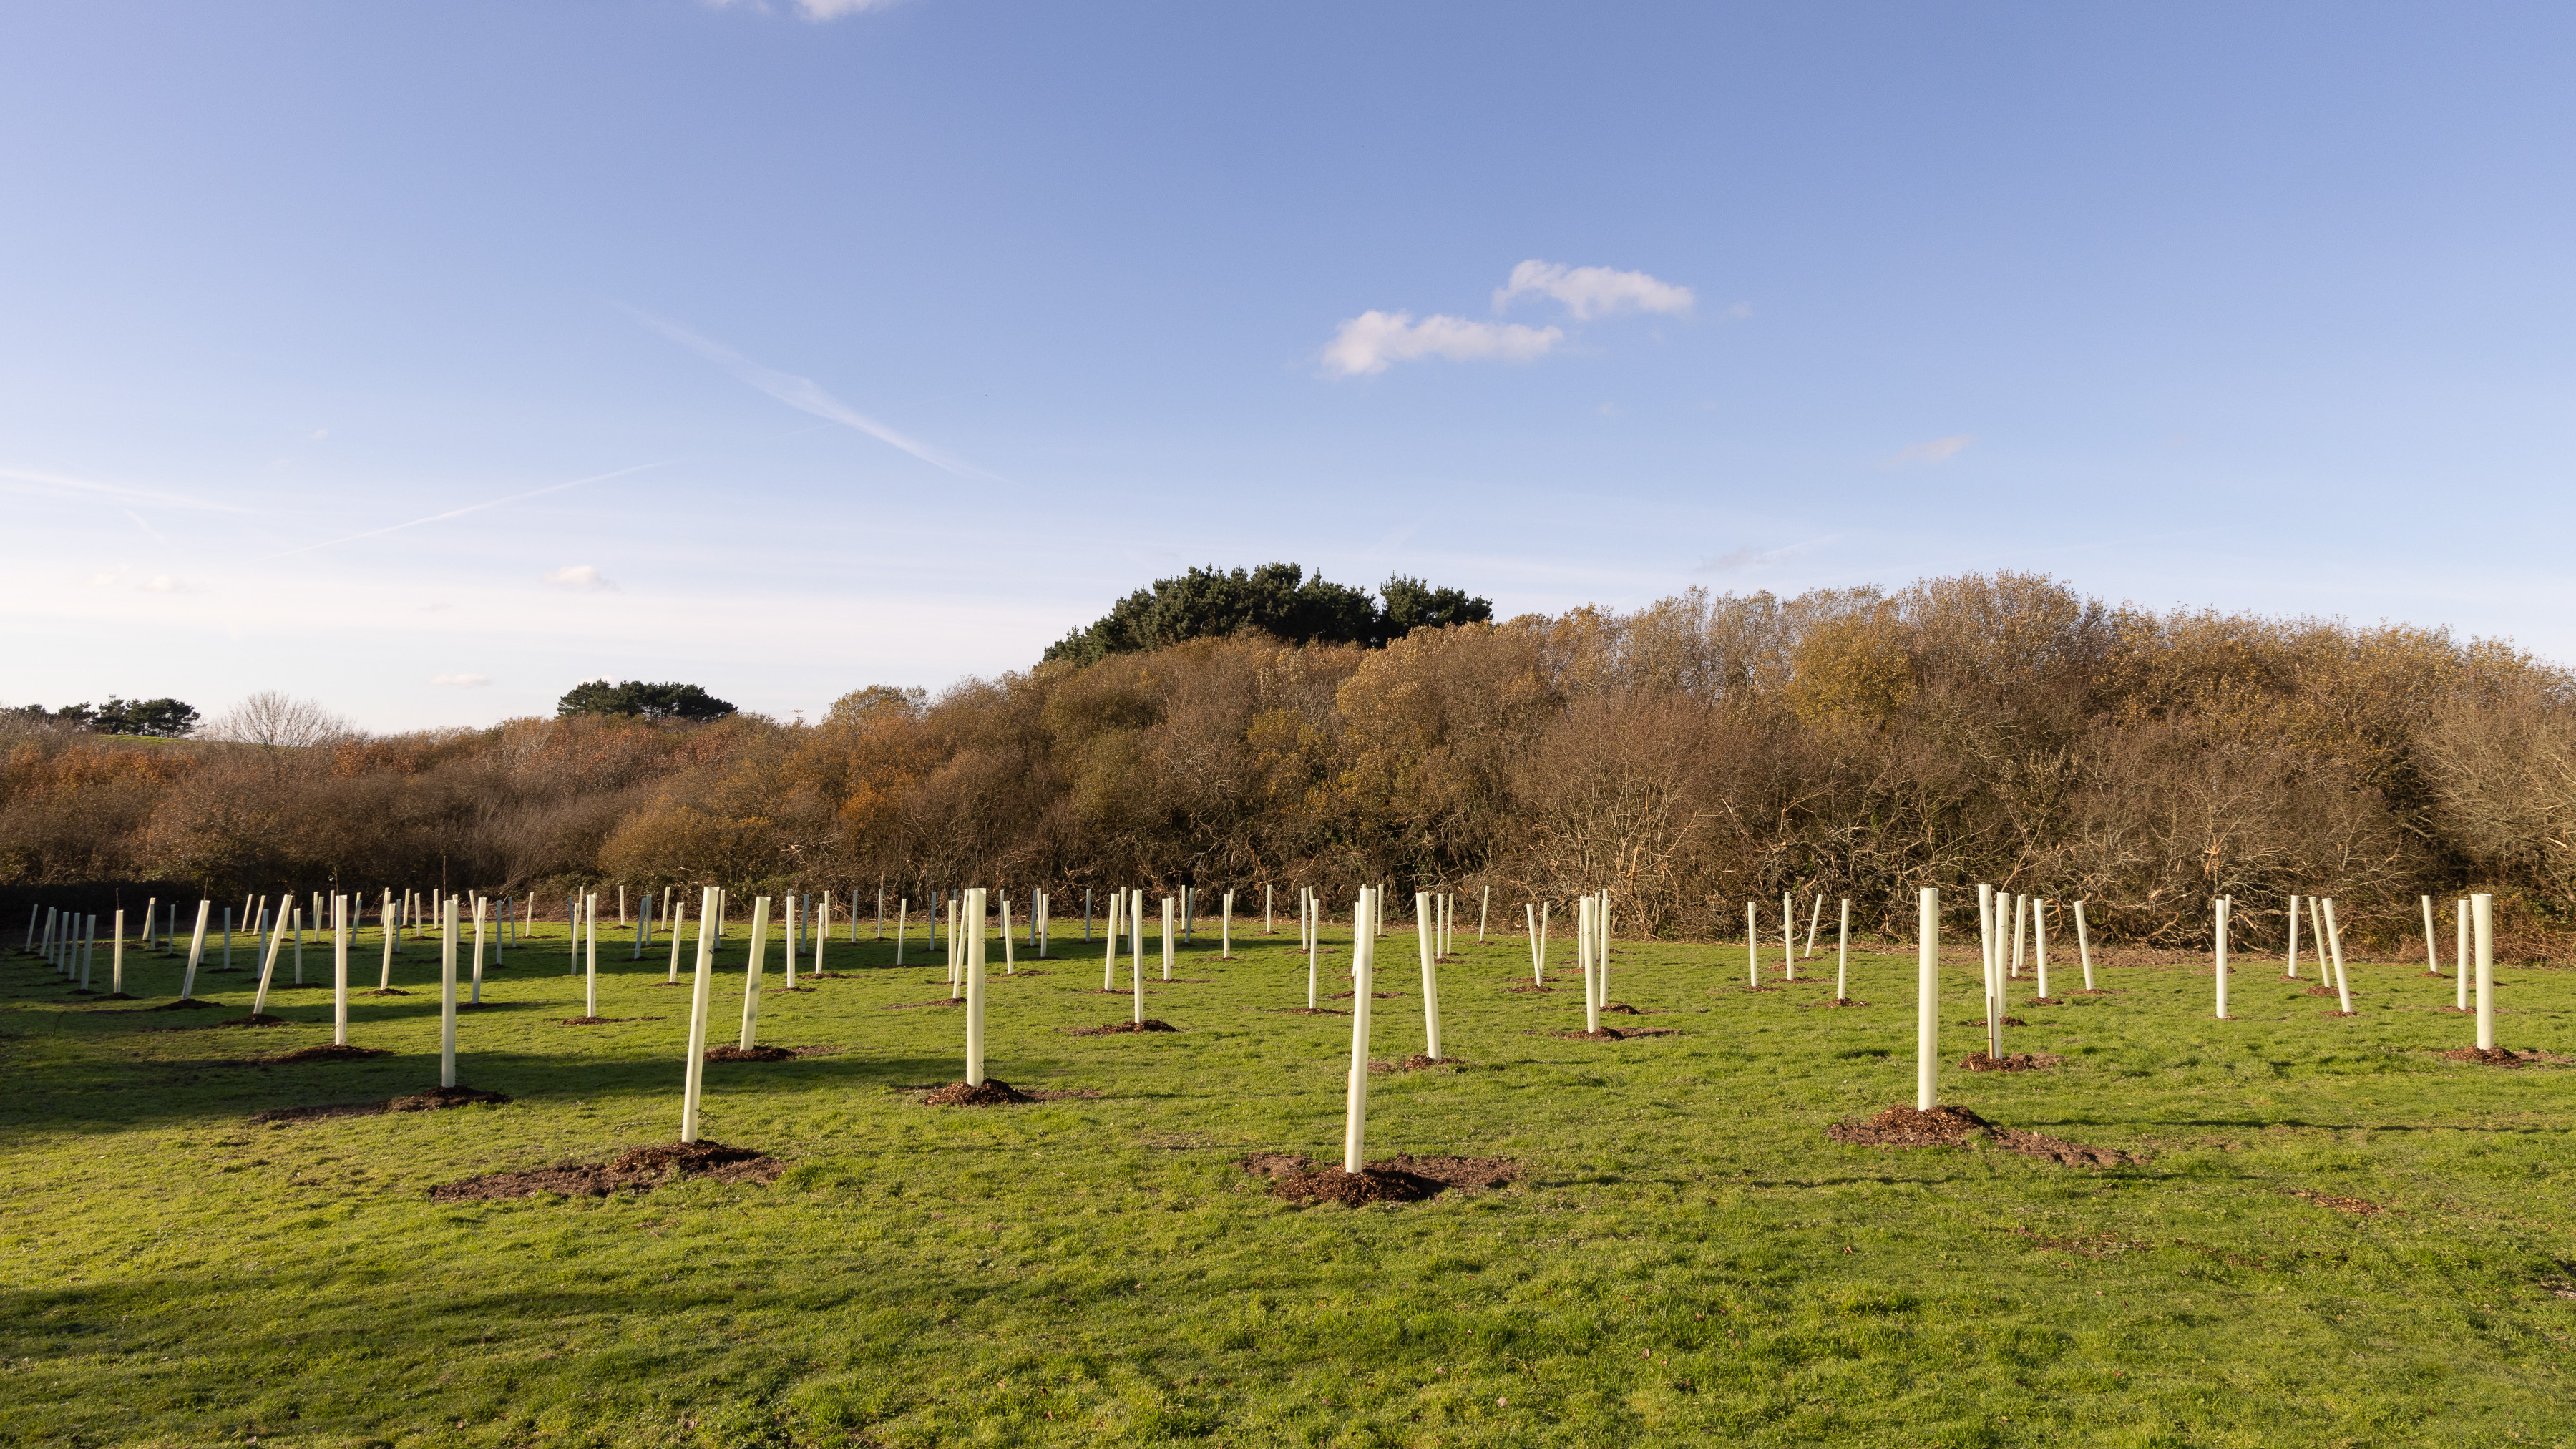 Image shows young trees planted in orchard.